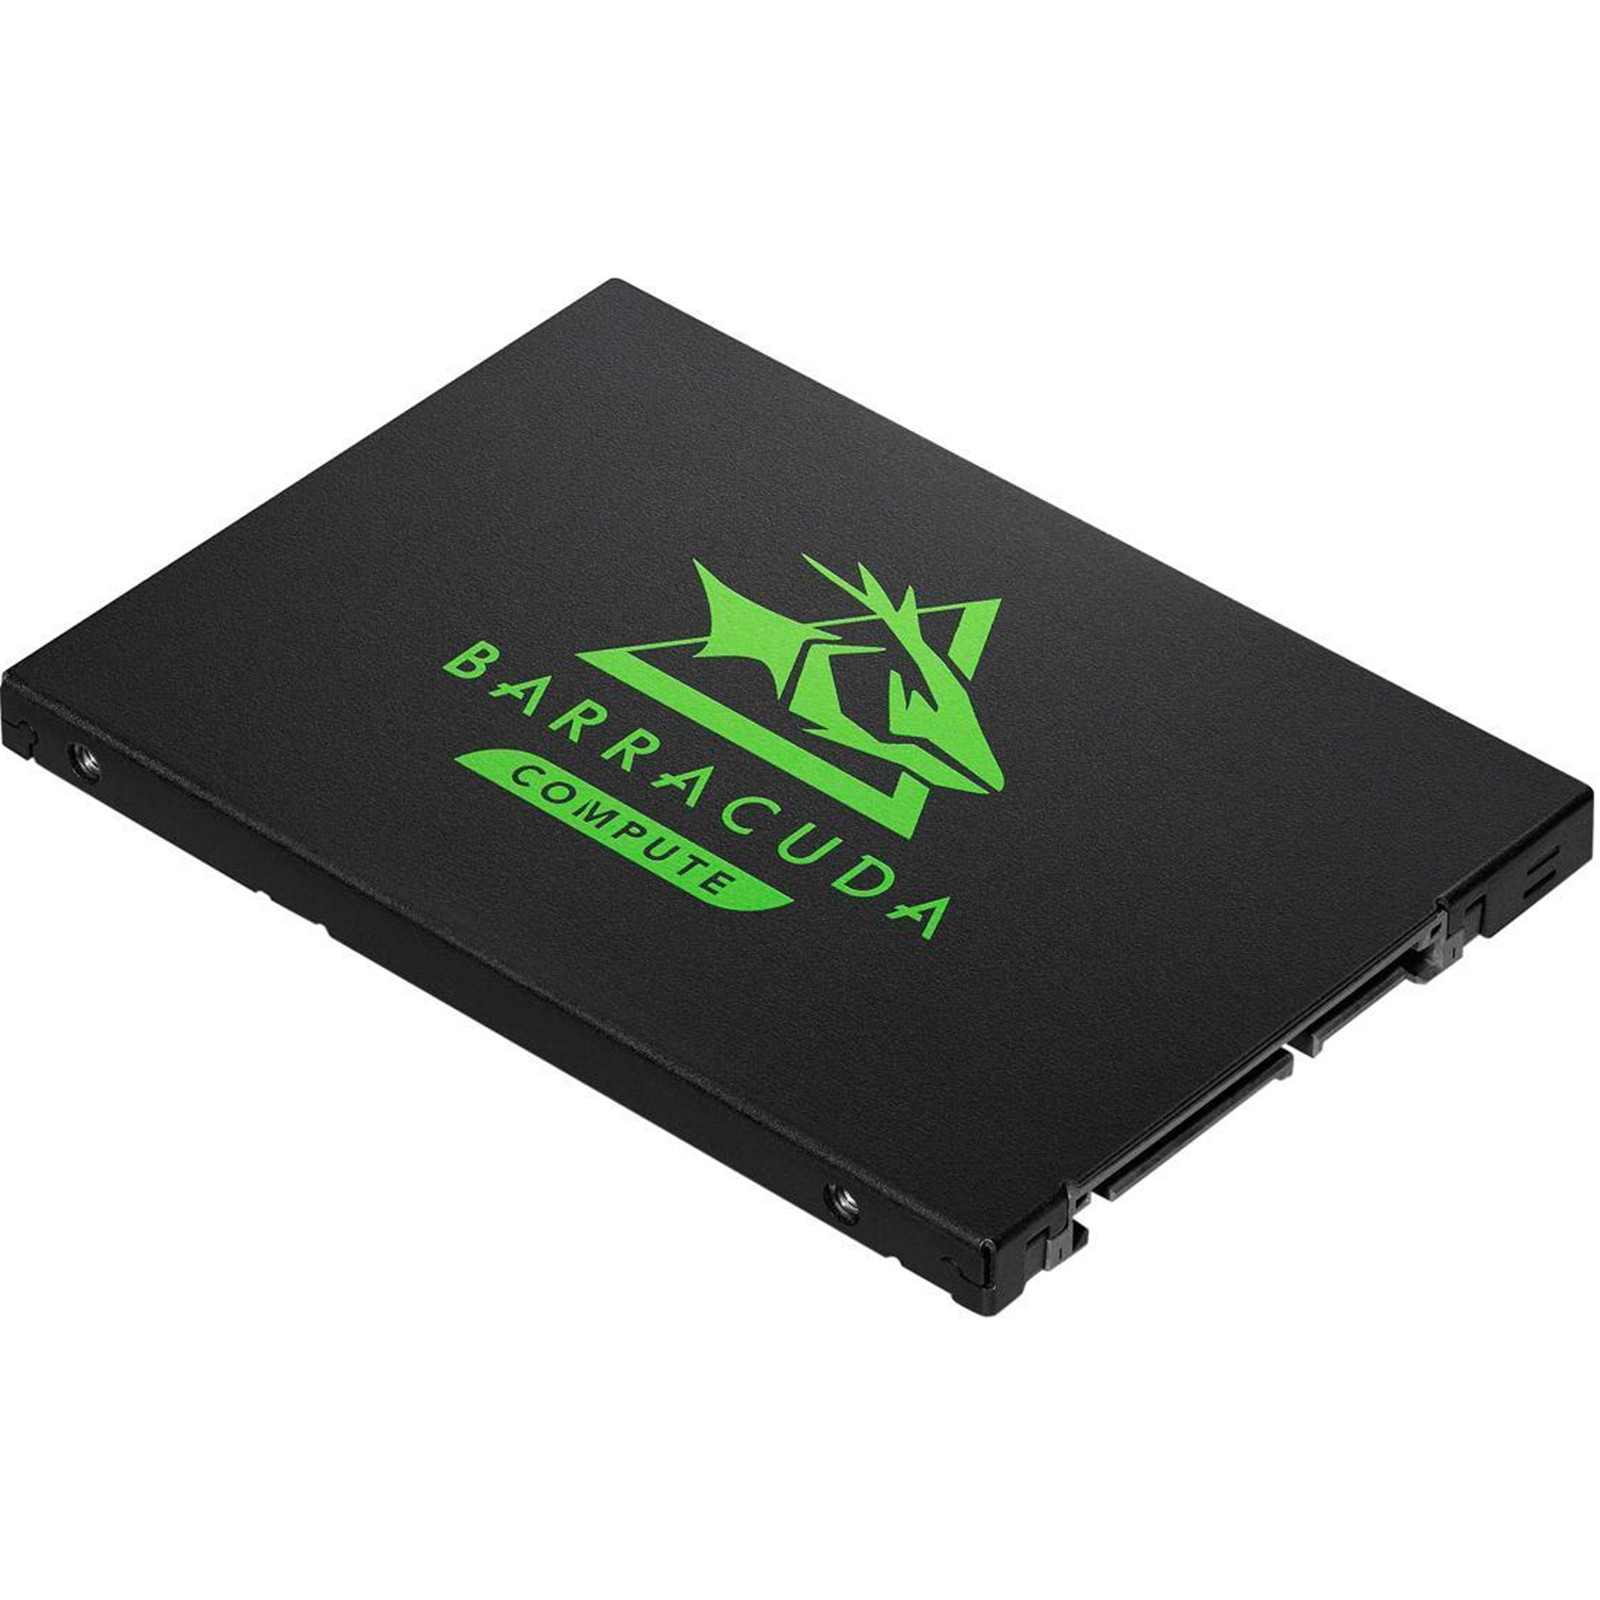 the Seagate BarraCuda 120 500GB 2.5" SATA3 Internal SSD Up 560MB/S Read... ) online - PBTech.com/pacific